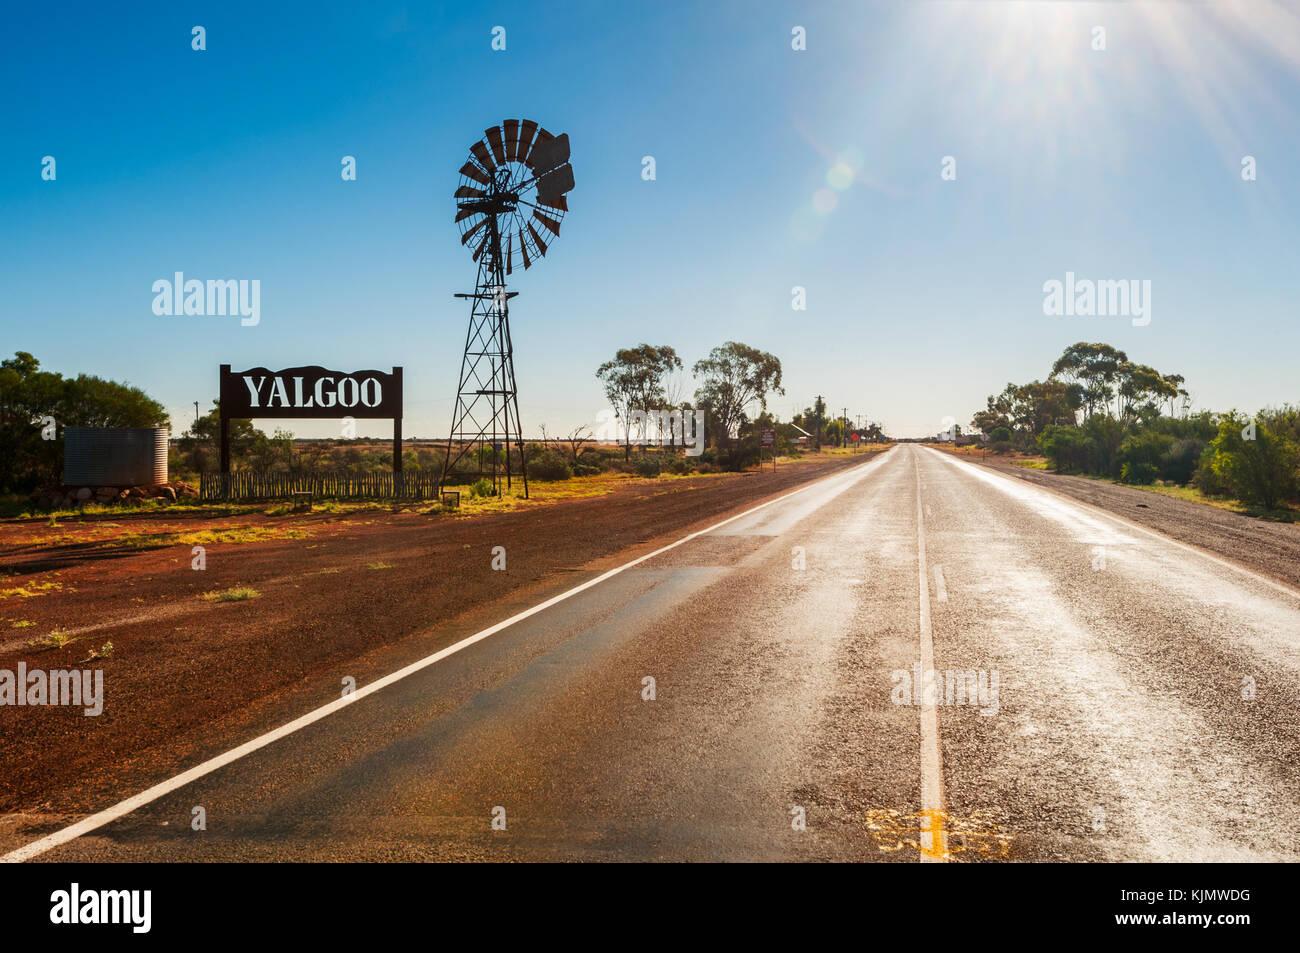 Town sign of Yalgoo in the outback of Western Australia. Stock Photo